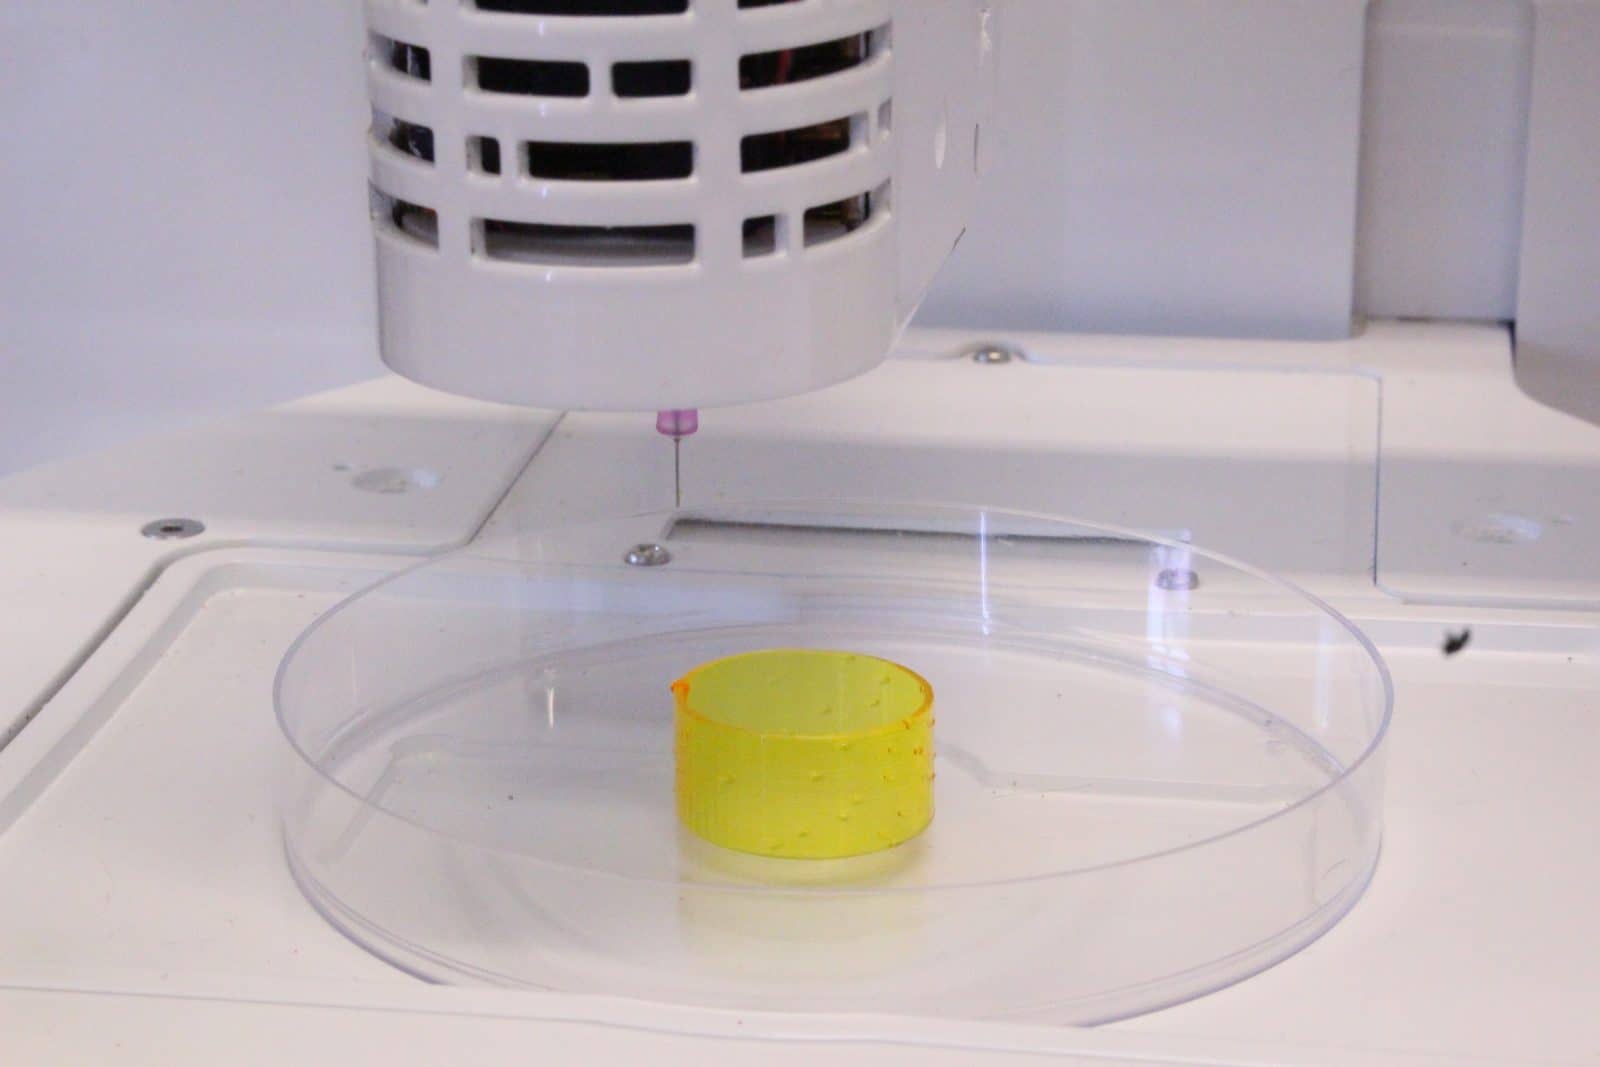 getting started guide bioprinting on the Allevi 1 bioprinter